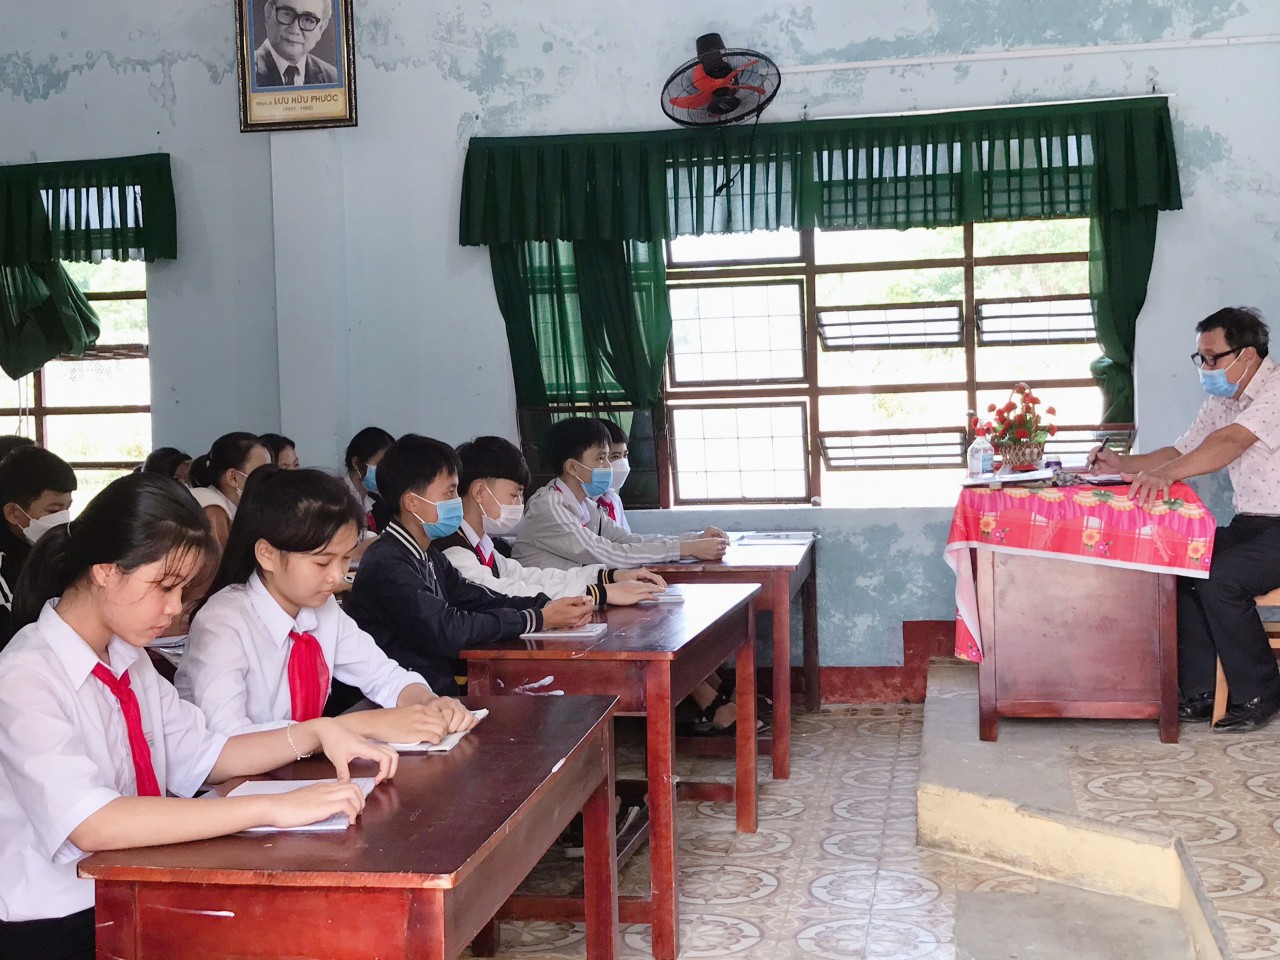 Students are studying in classroom